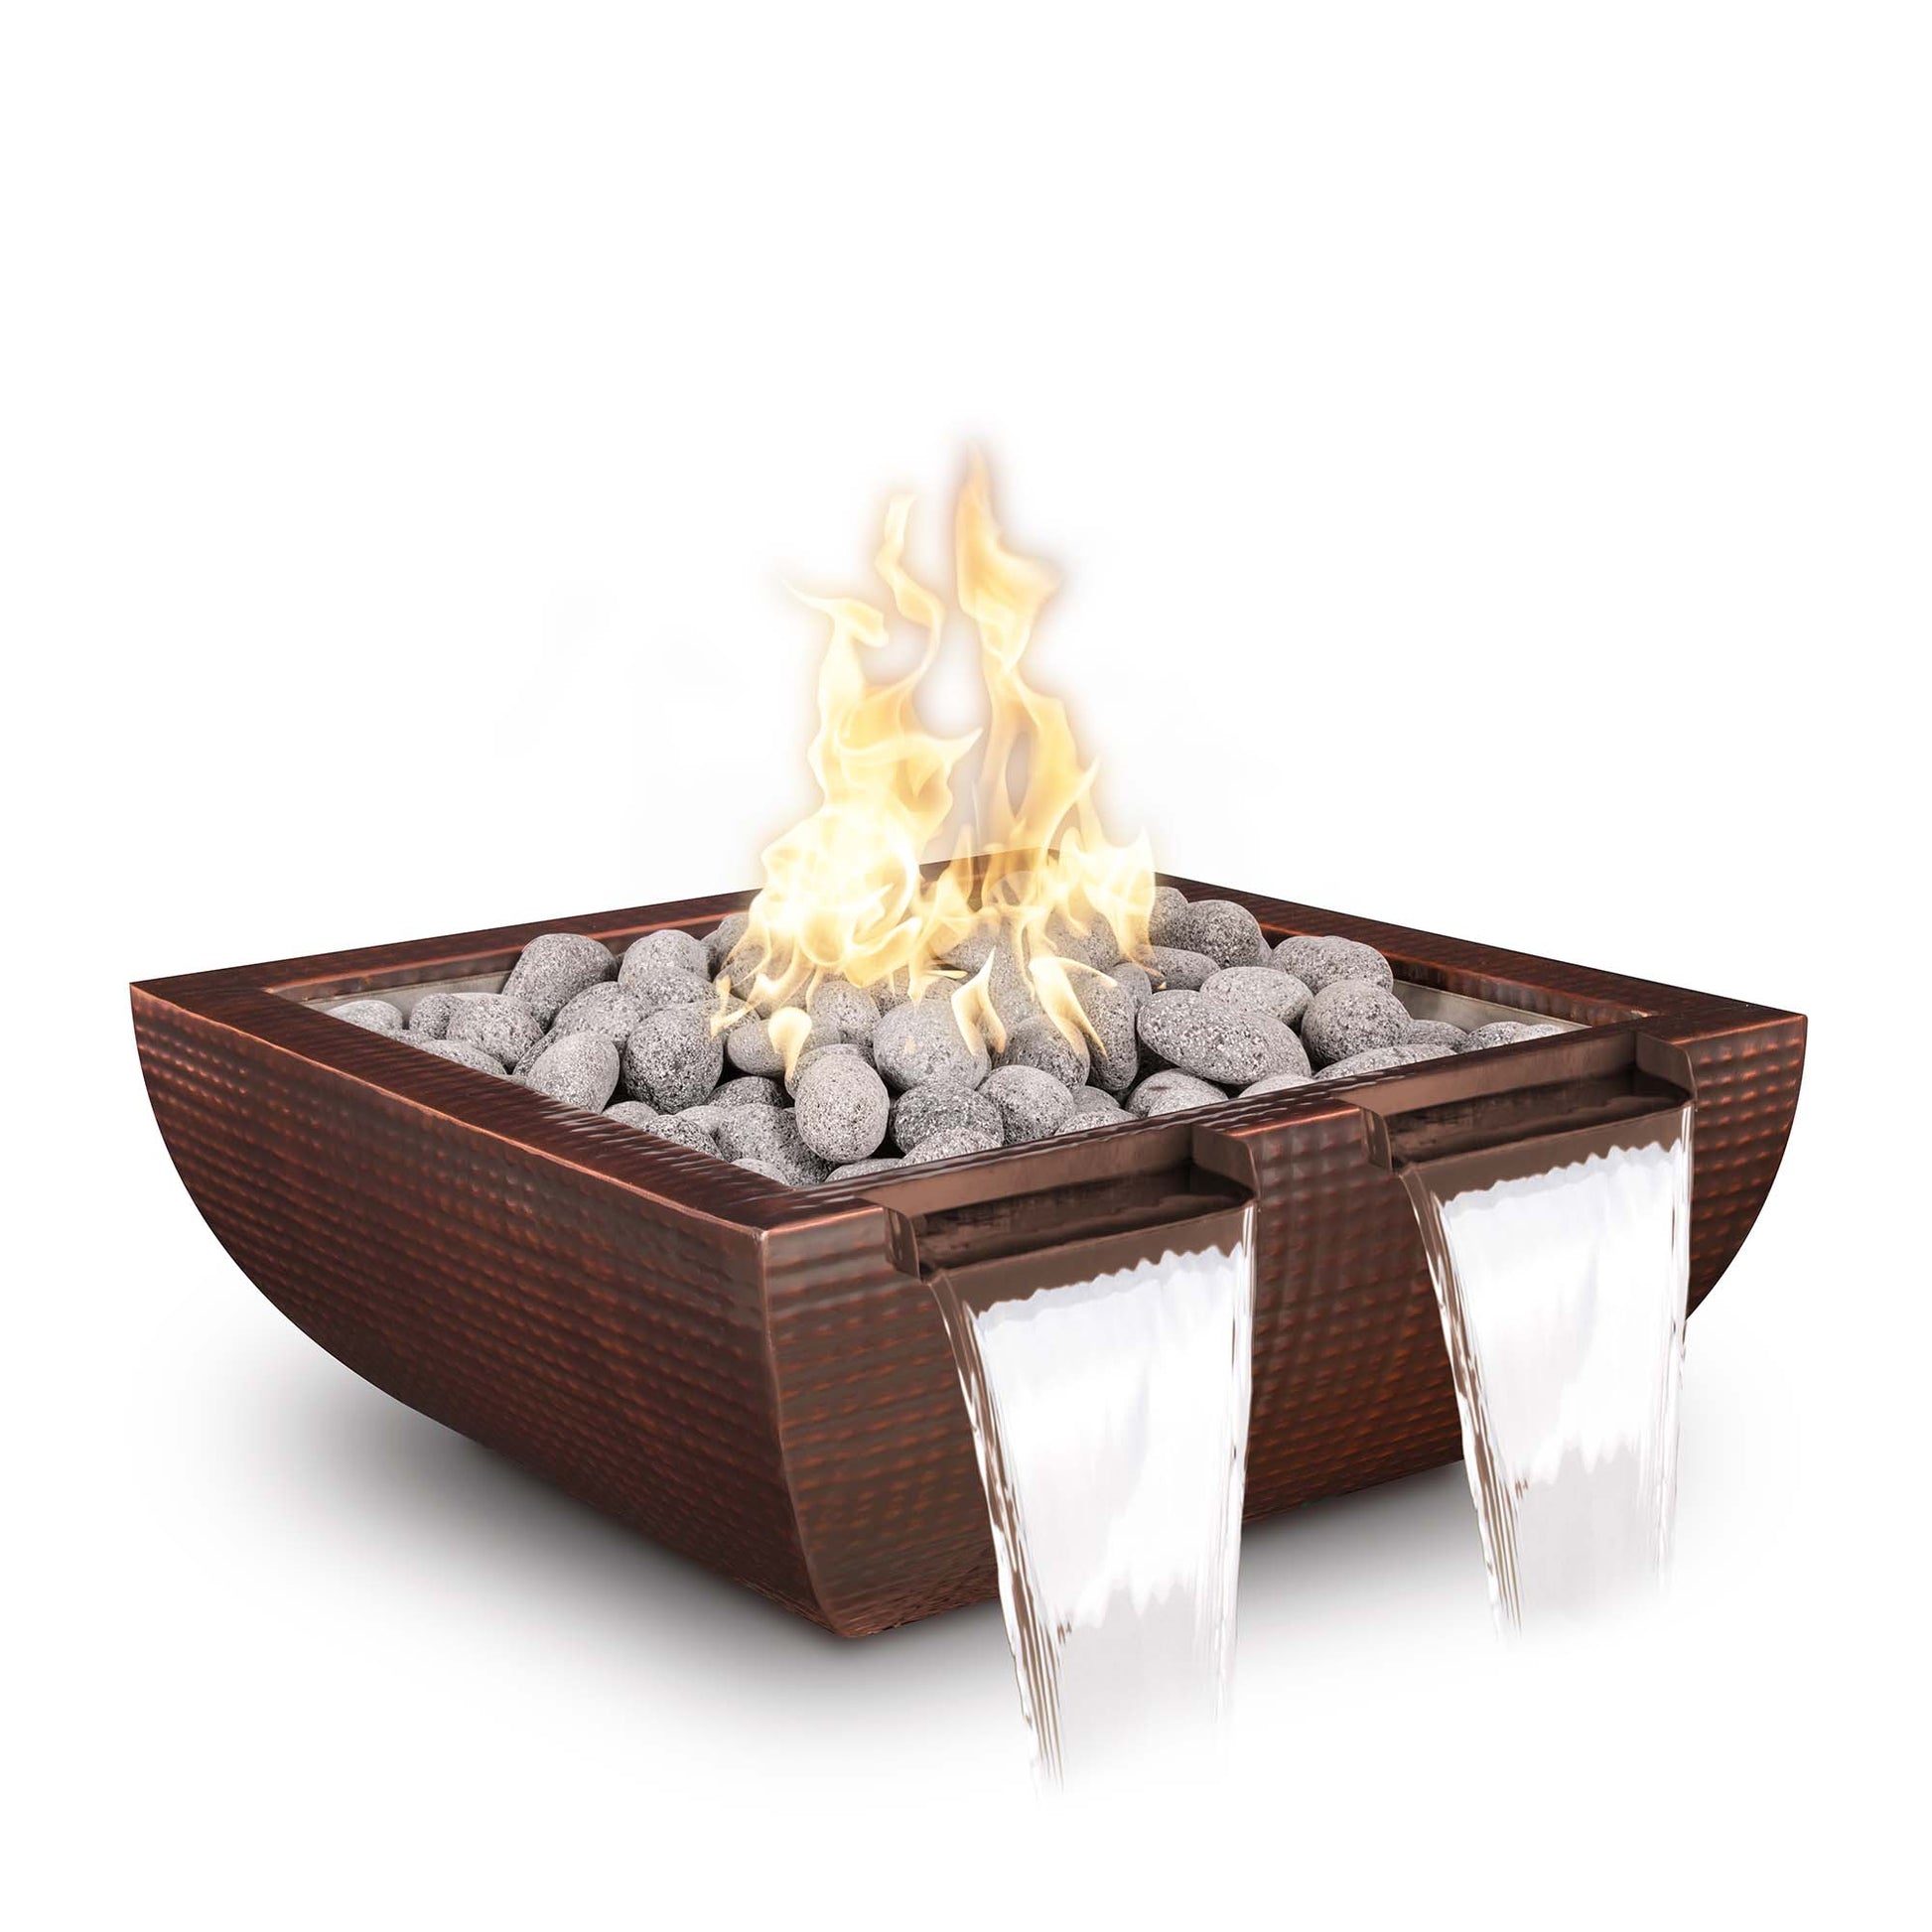 The Outdoor Plus Avalon Twin Spill 30" Pewter Powder Coated Metal Liquid Propane Fire & Water Bowl with Match Lit Ignition